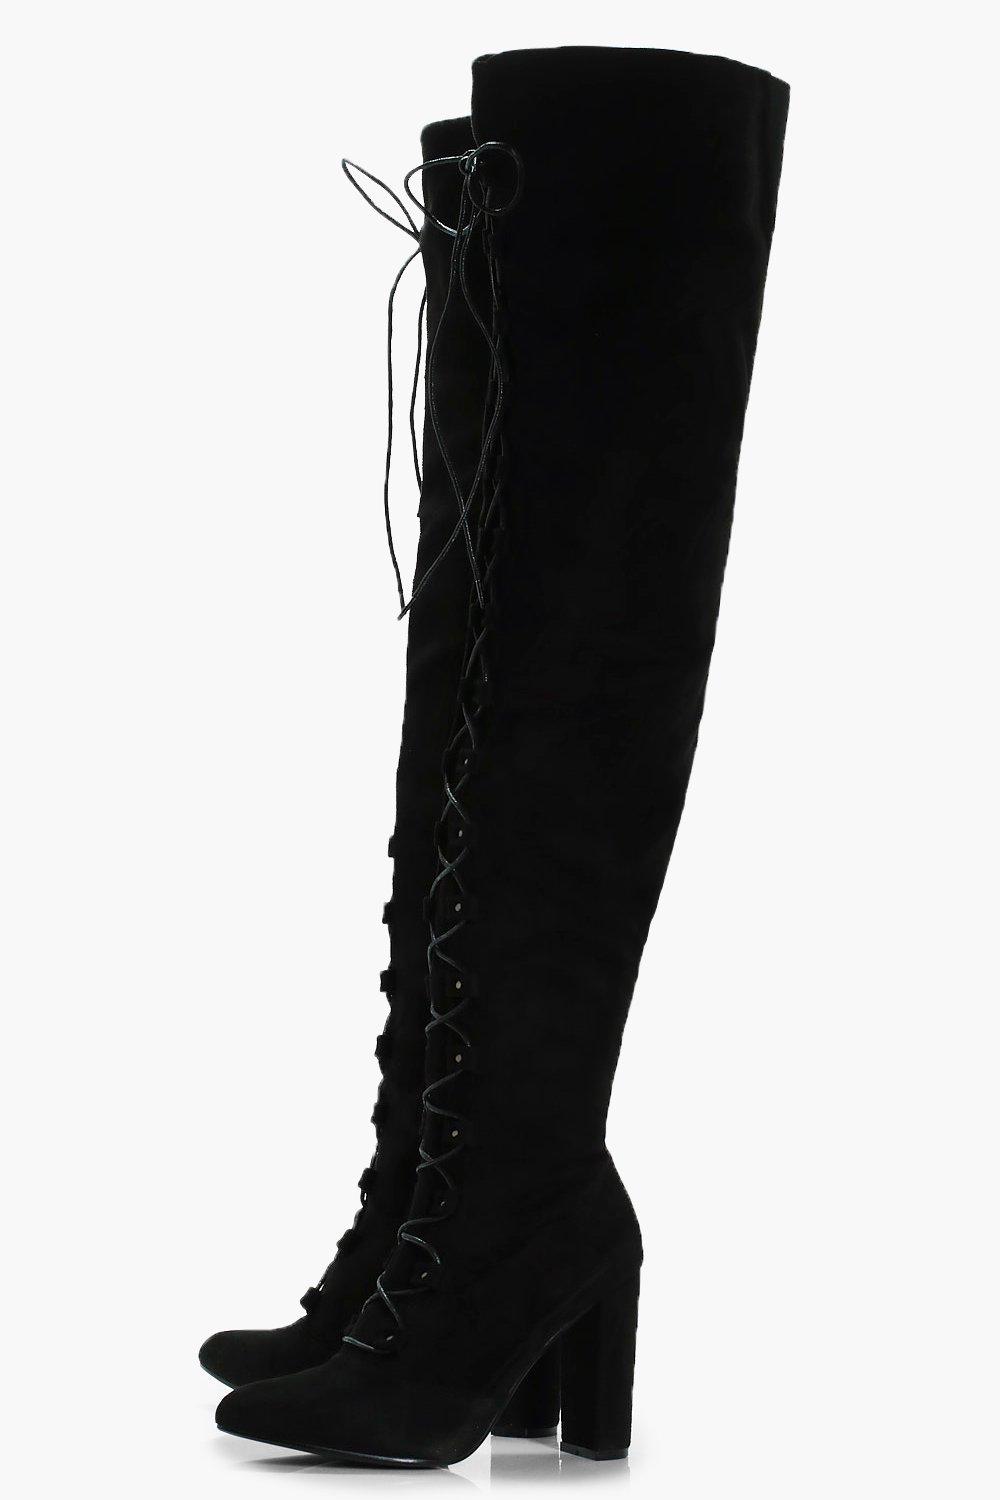 keeping over the knee boots up